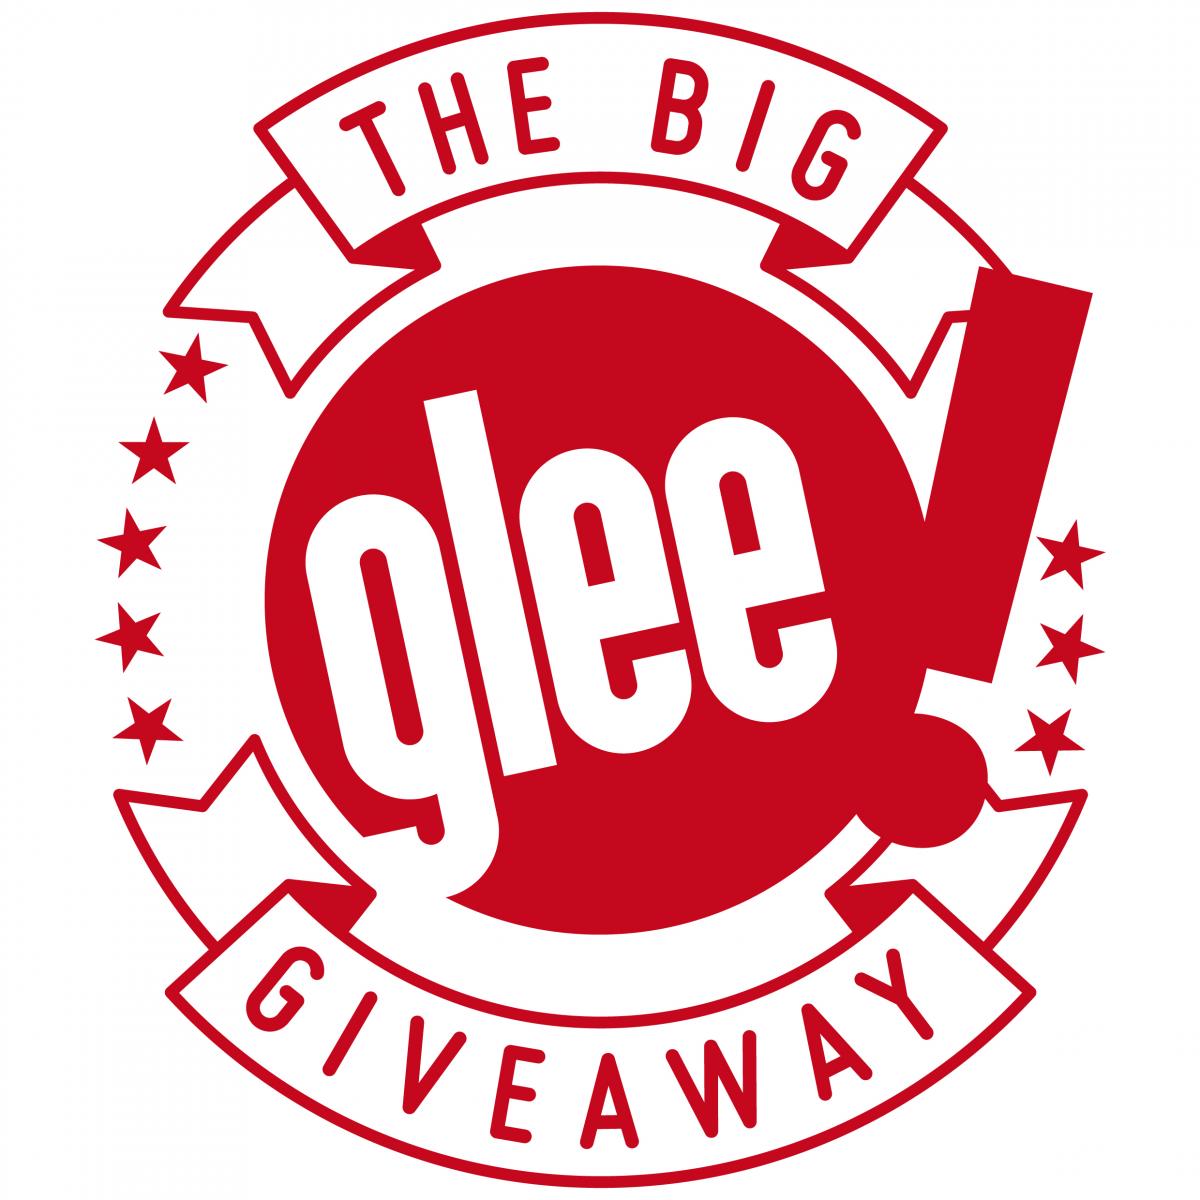 The #BigGleeGiveaway is back in Oxford with 1000 free tickets available